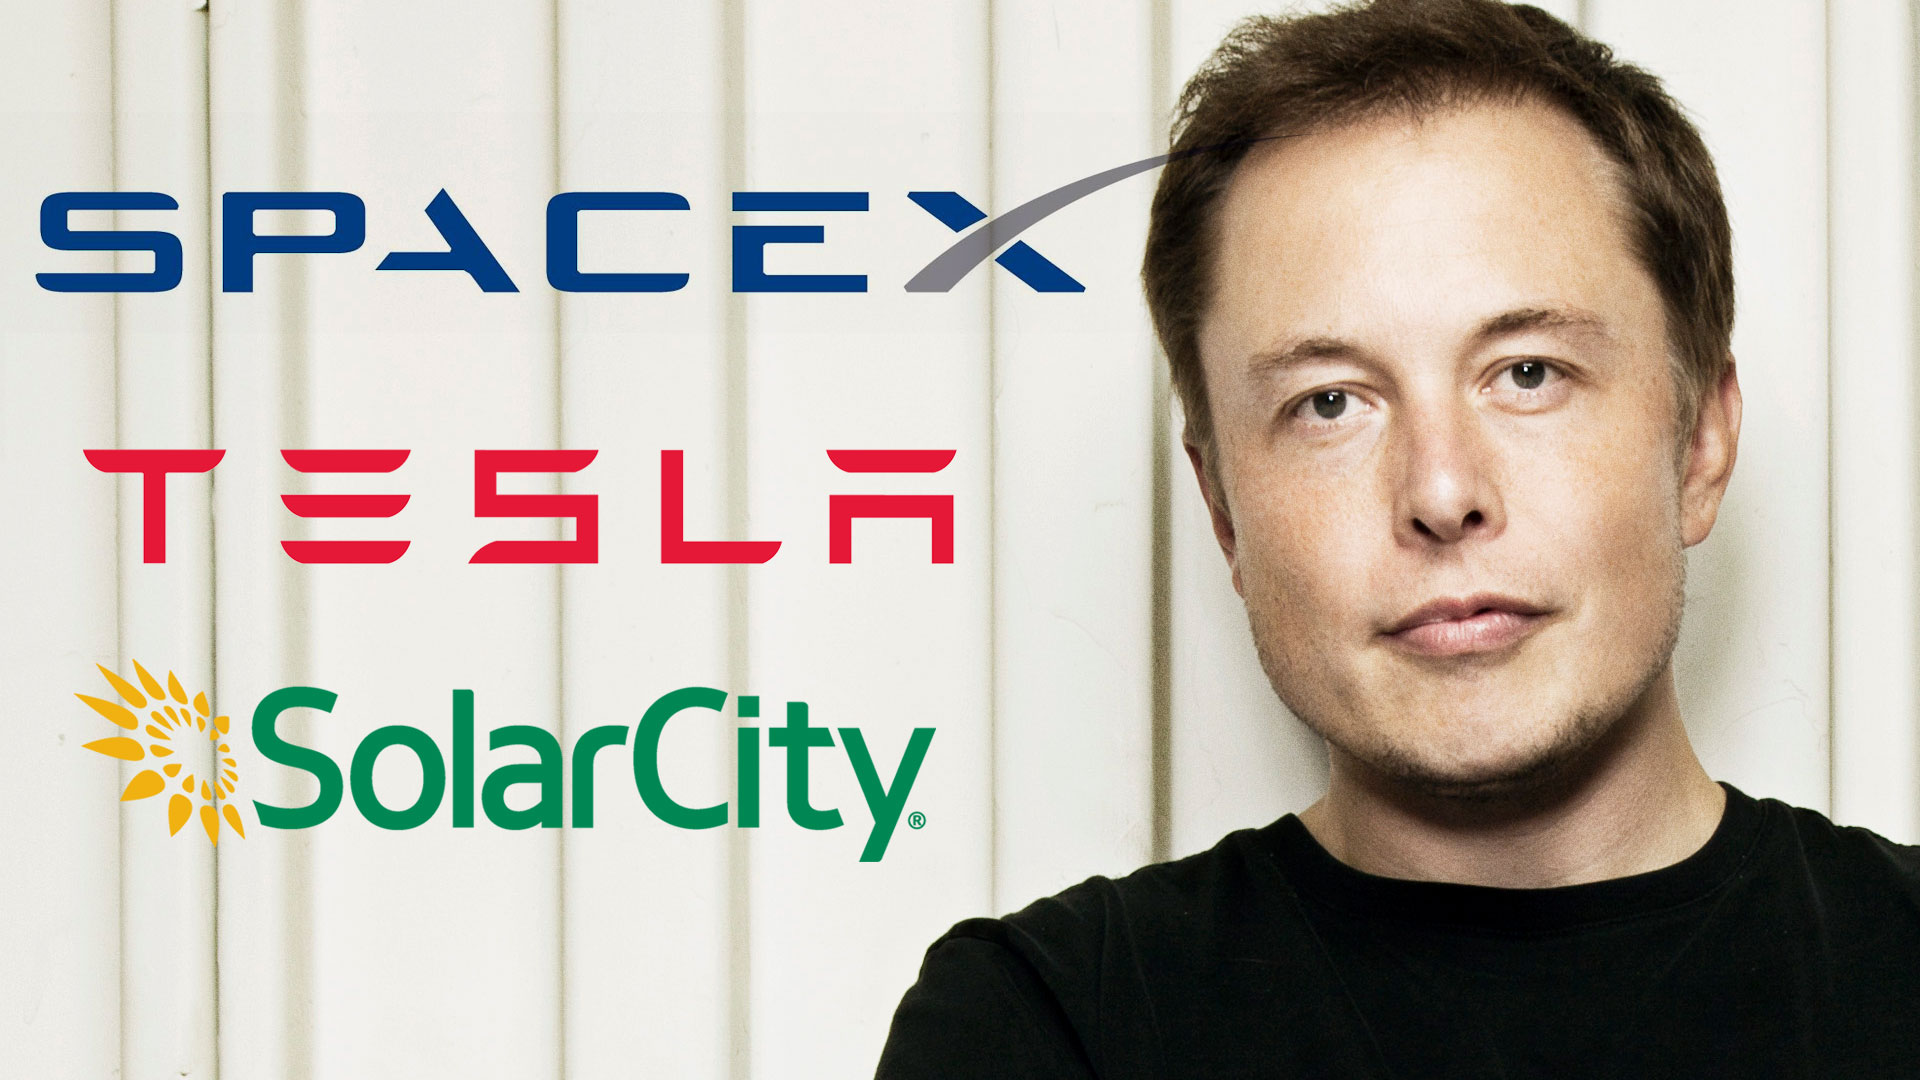 Leadership Lessons from Elon Musk